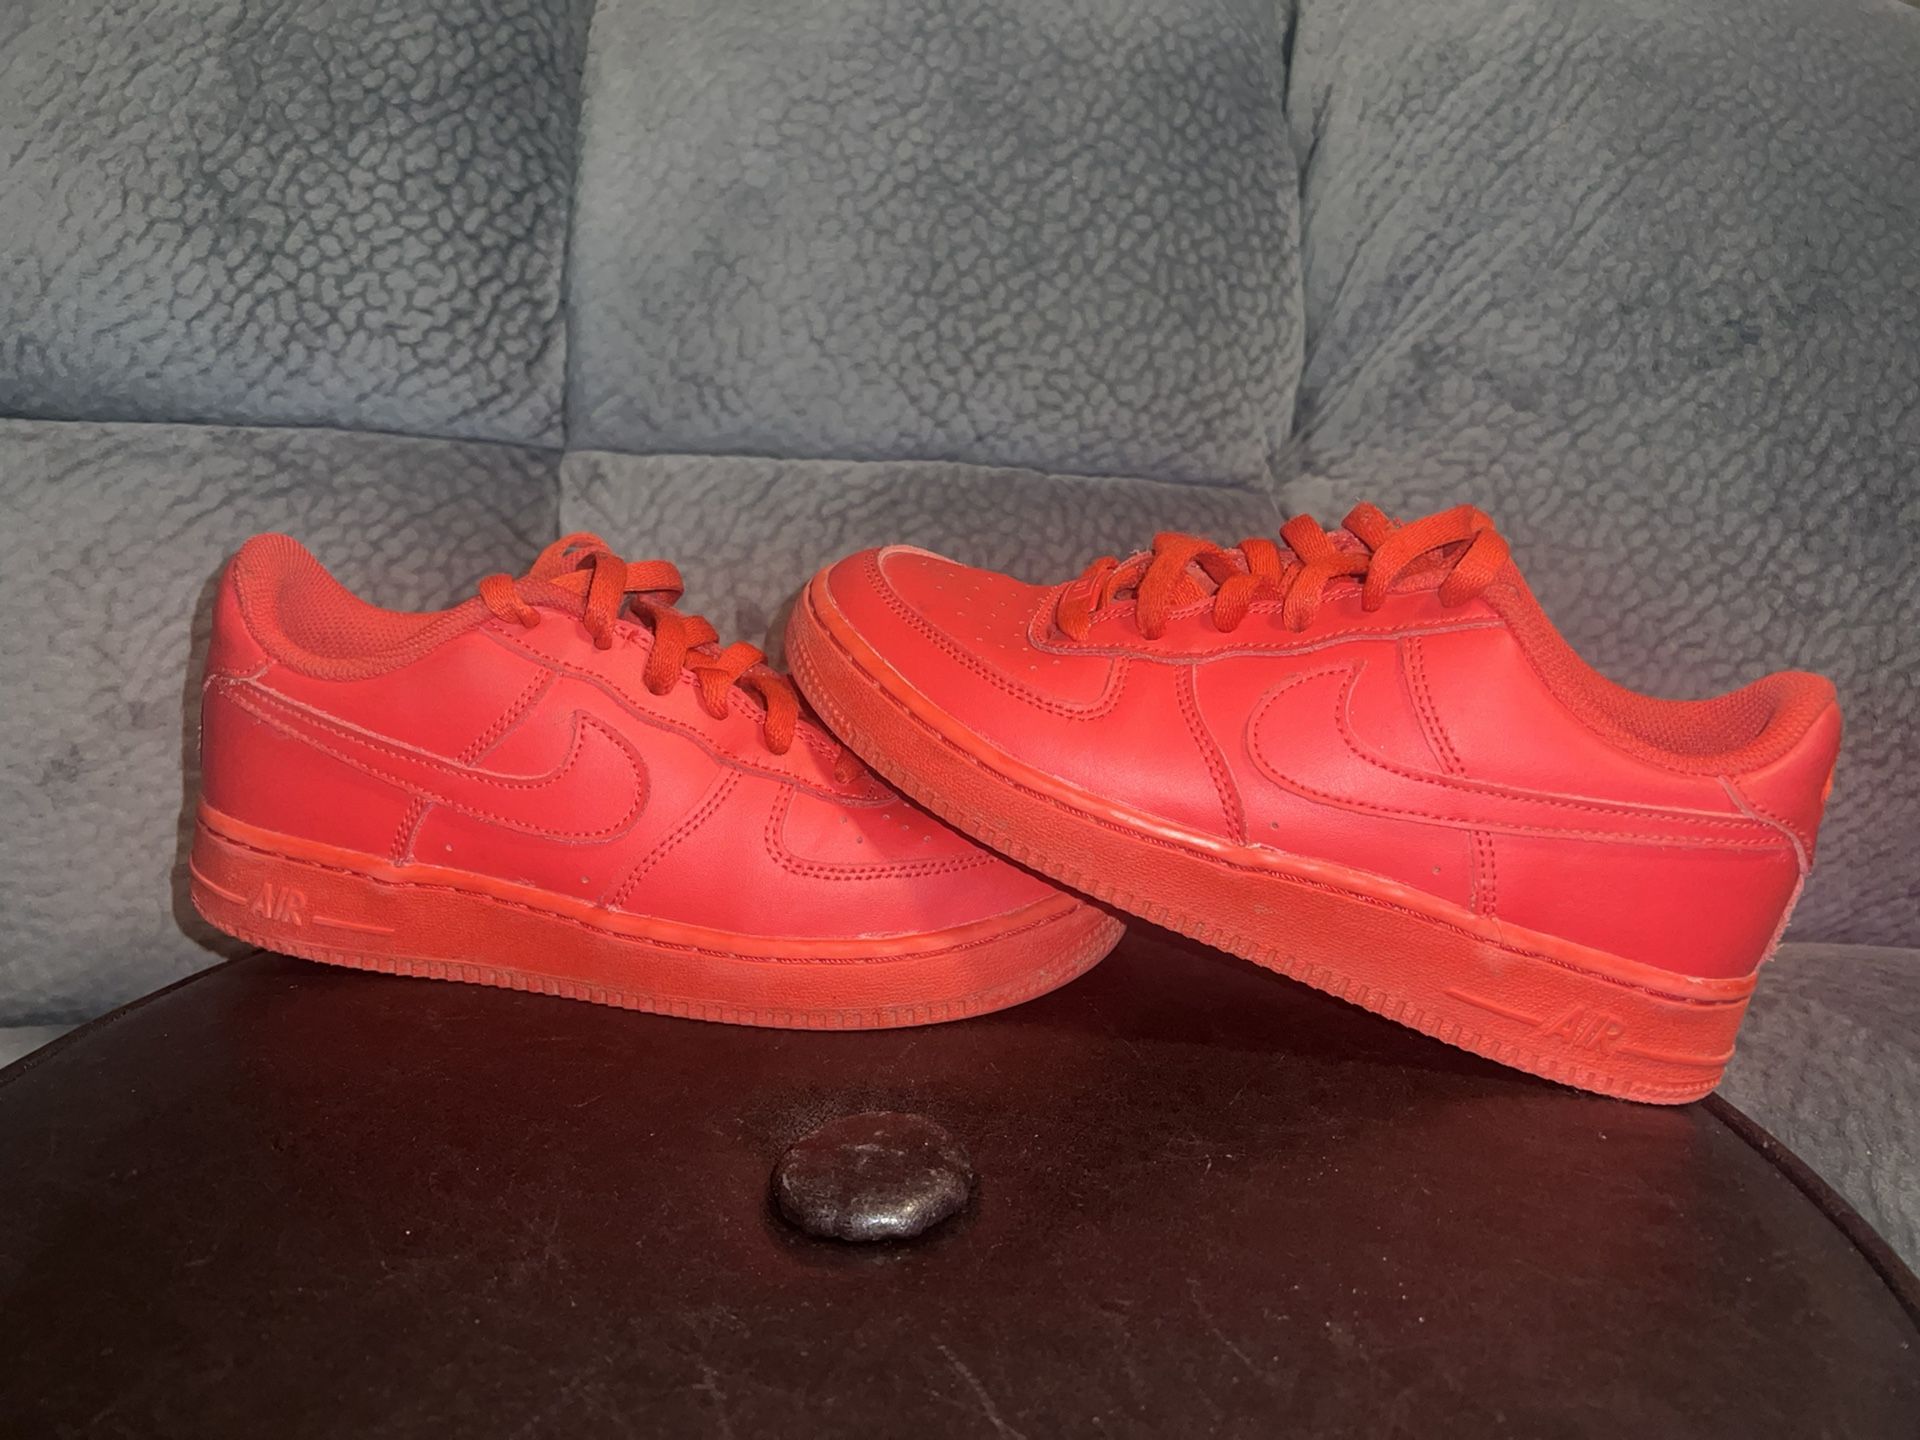 Nike Air Force One LV8 FTL Size 6 for Sale in Ruskin, FL - OfferUp